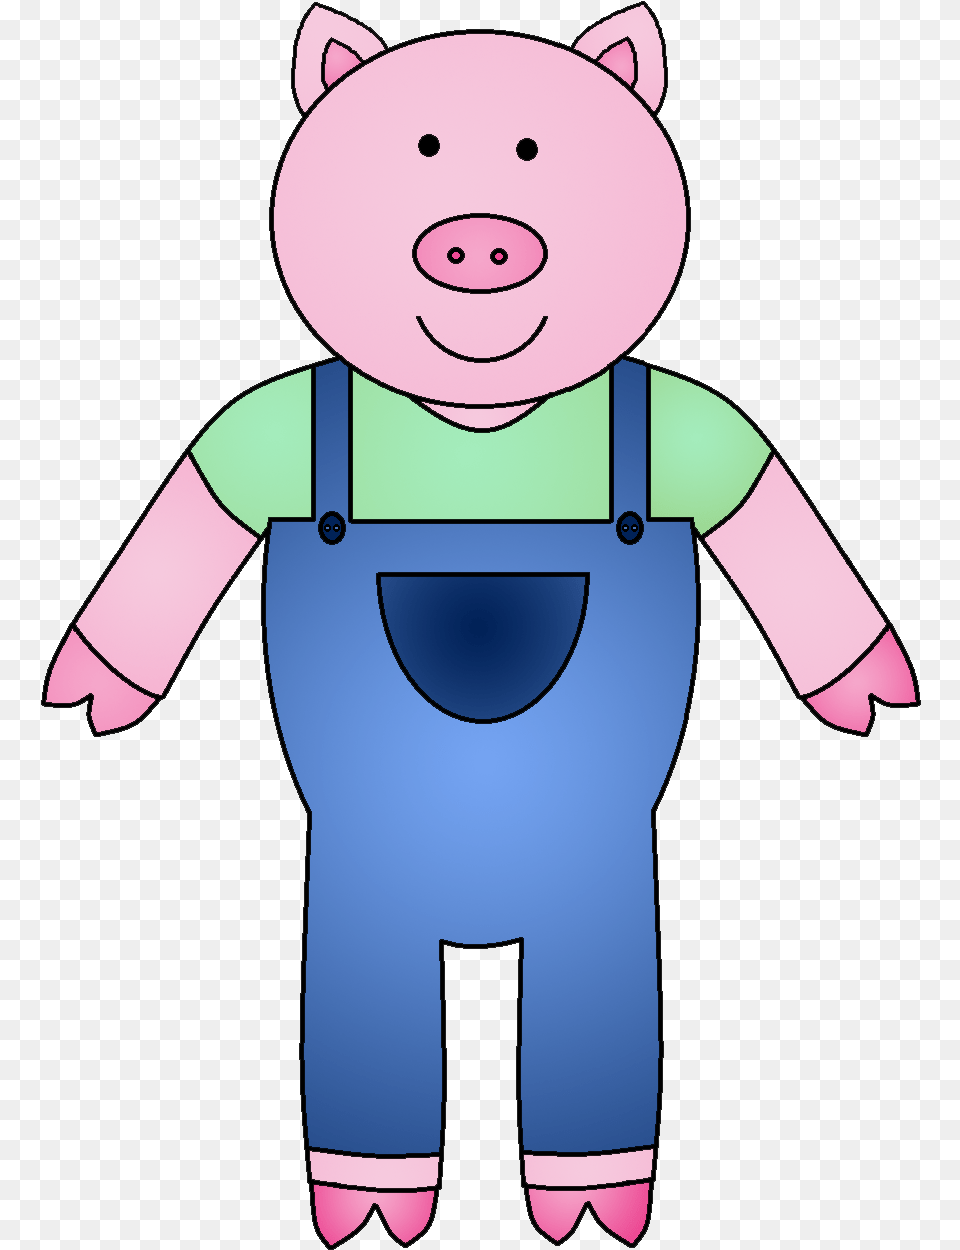 The Three Little Pigs Clipart 3 Little Pig Cartoon, Clothing, Pants, Baby, Person Png Image